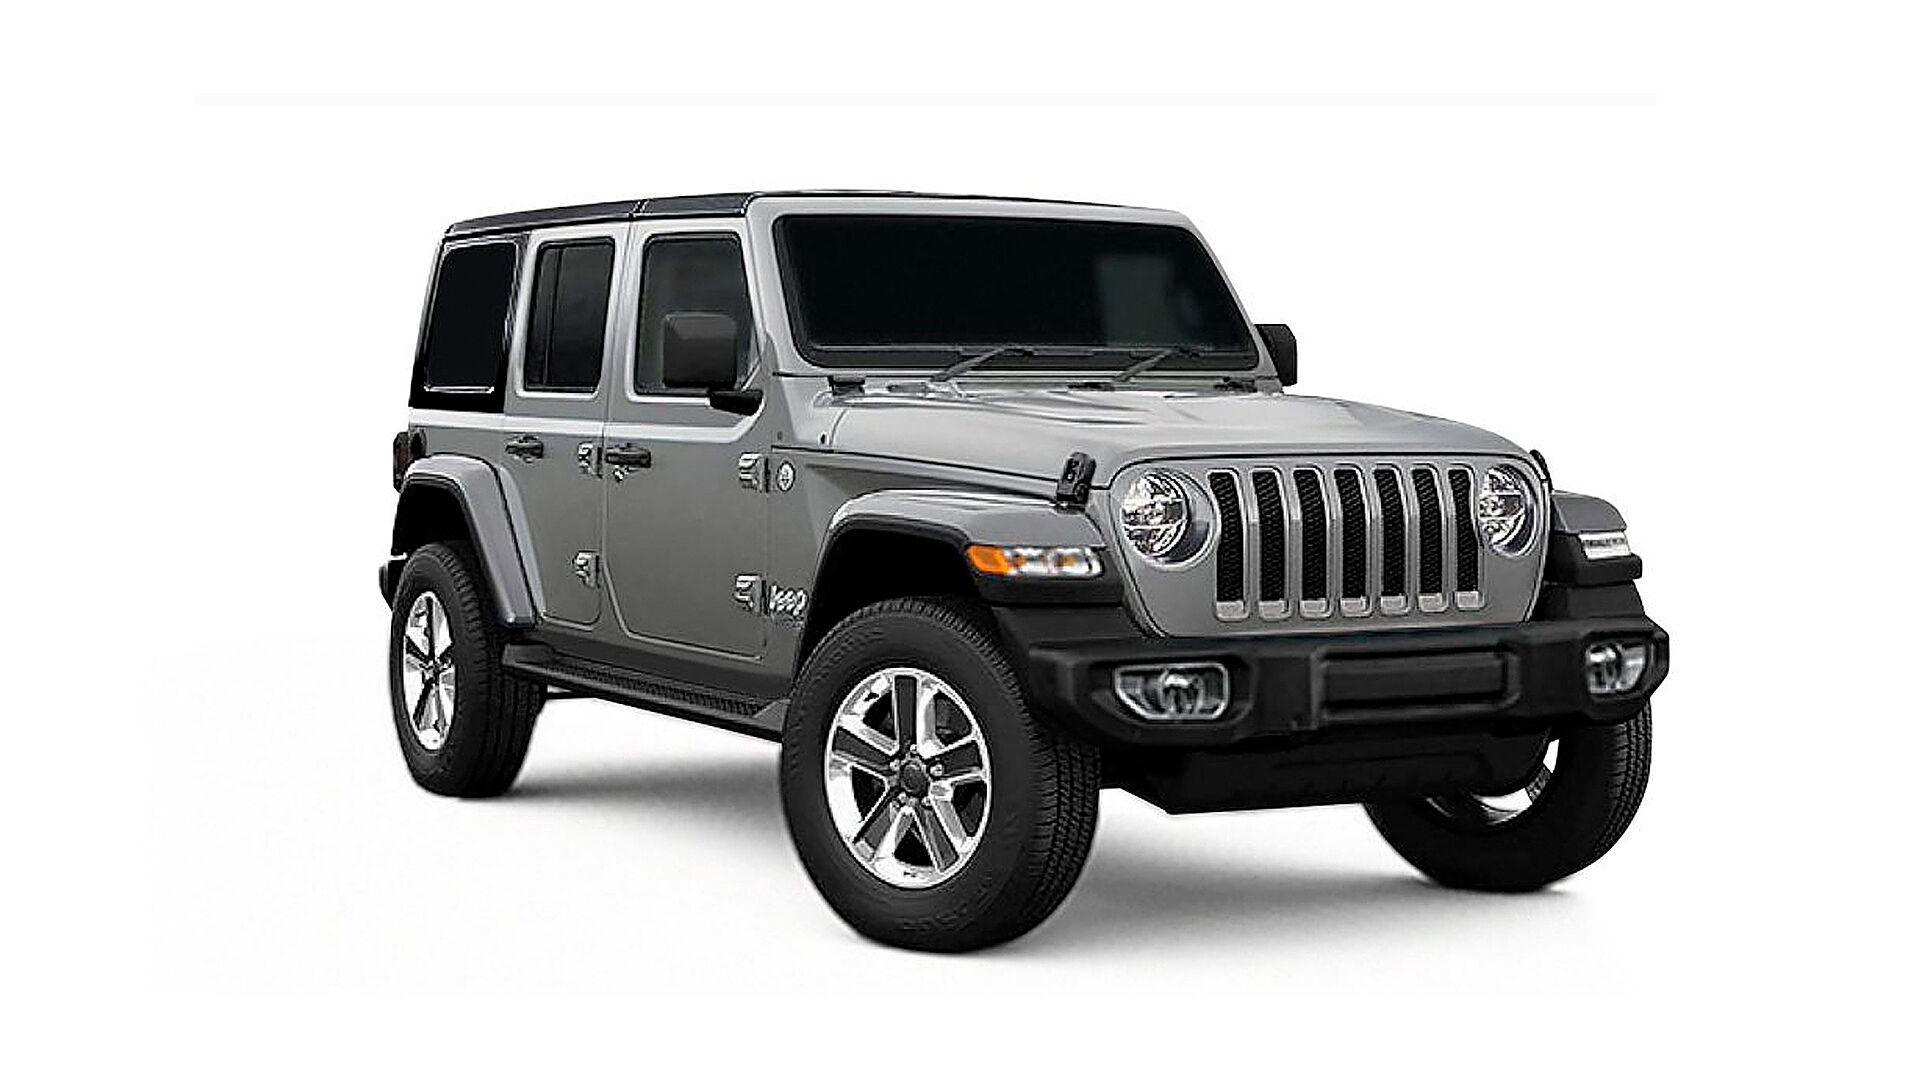 Wrangler Rubicon is a worthy Jeep but it's too expensive for city